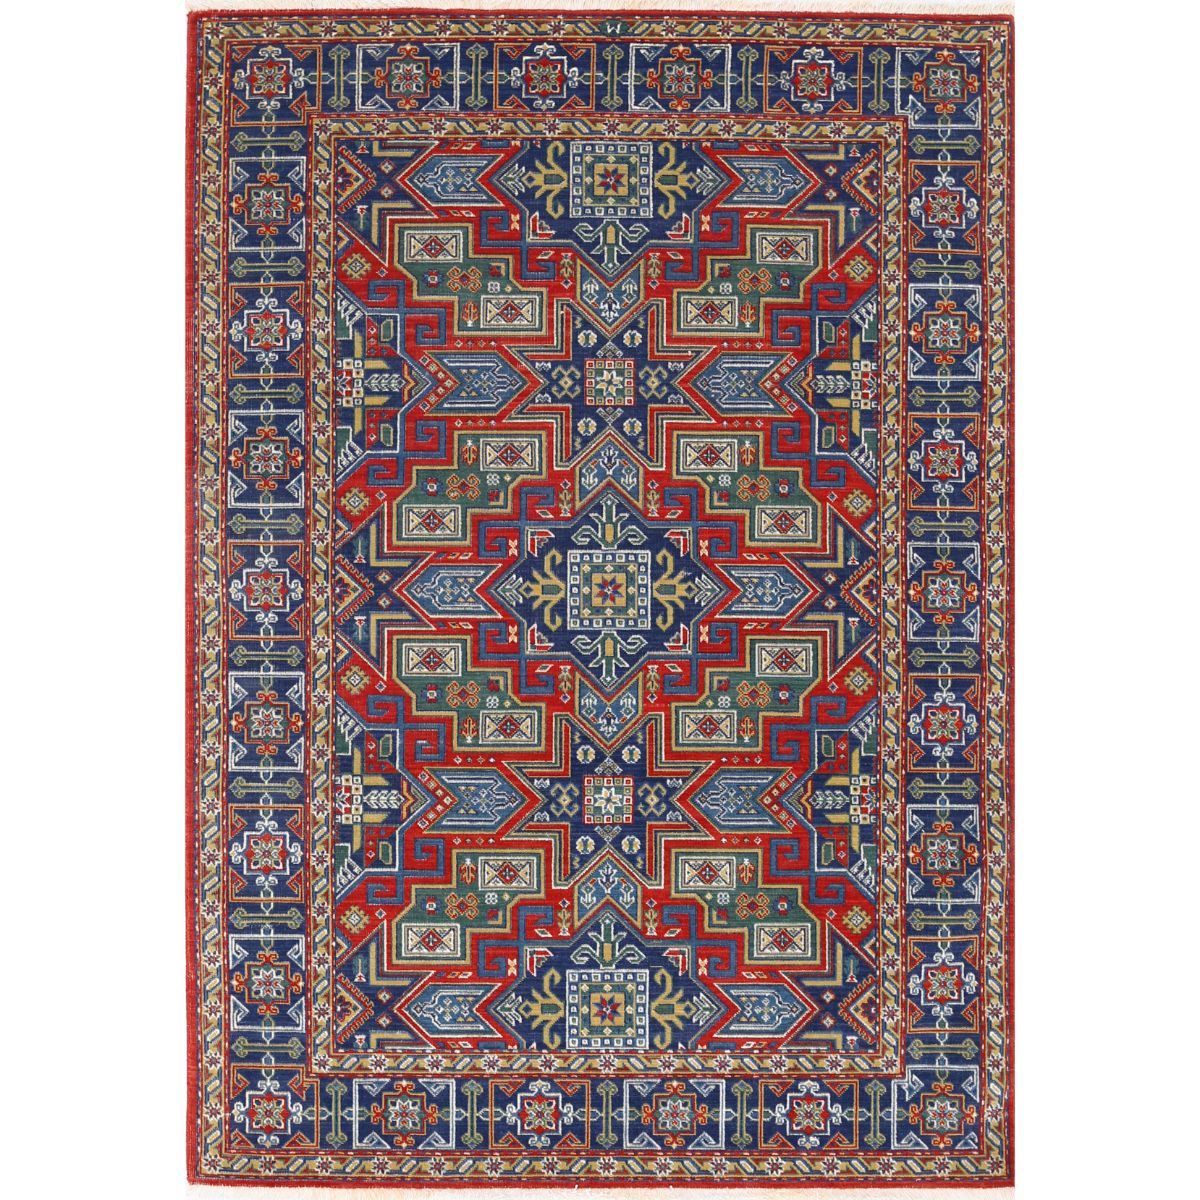 Gulshan Collection Powered Loomed Red 4'0" X 5'9" Rectangle Gulshan Design Wool Rug